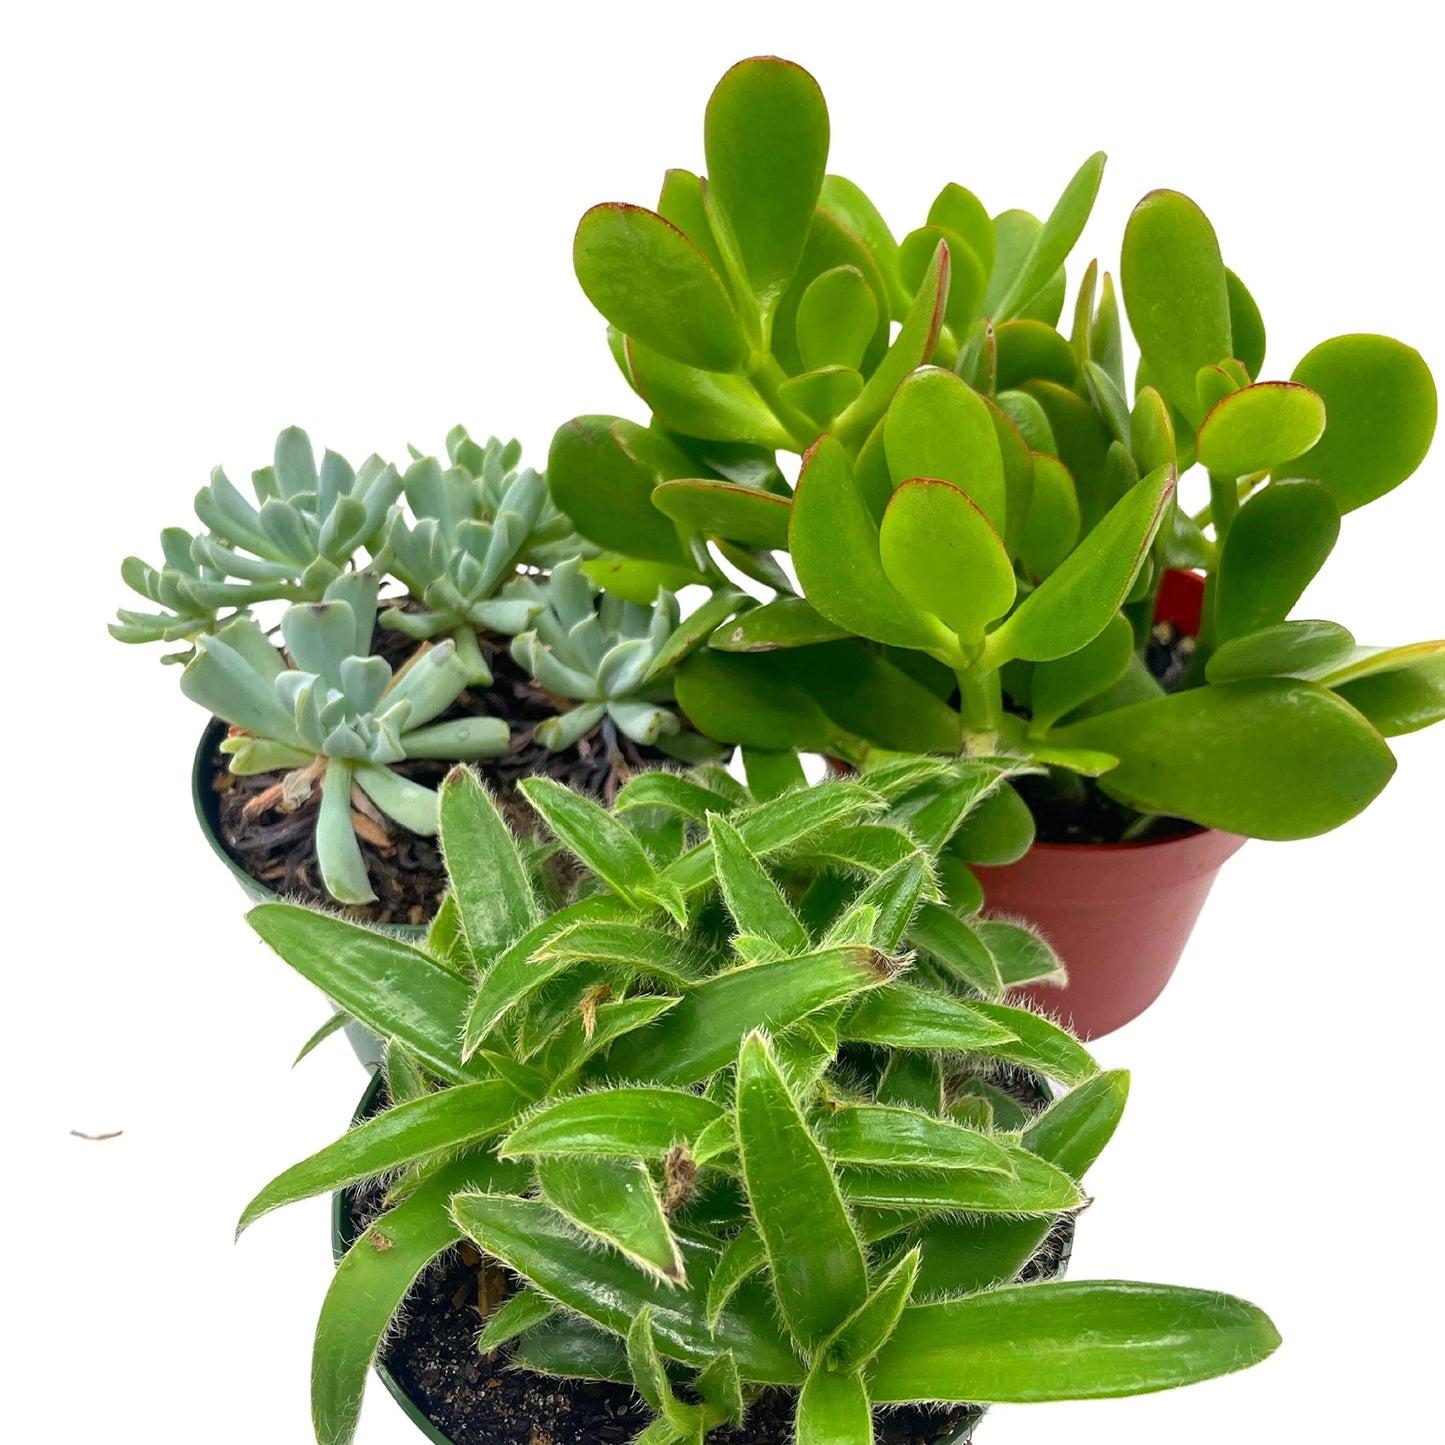 Succulent Assortment Set, 4 inch pots, Set of 3, Variety, Jade Plant, Jelly Beans, Humilis, Taco Plants, and More